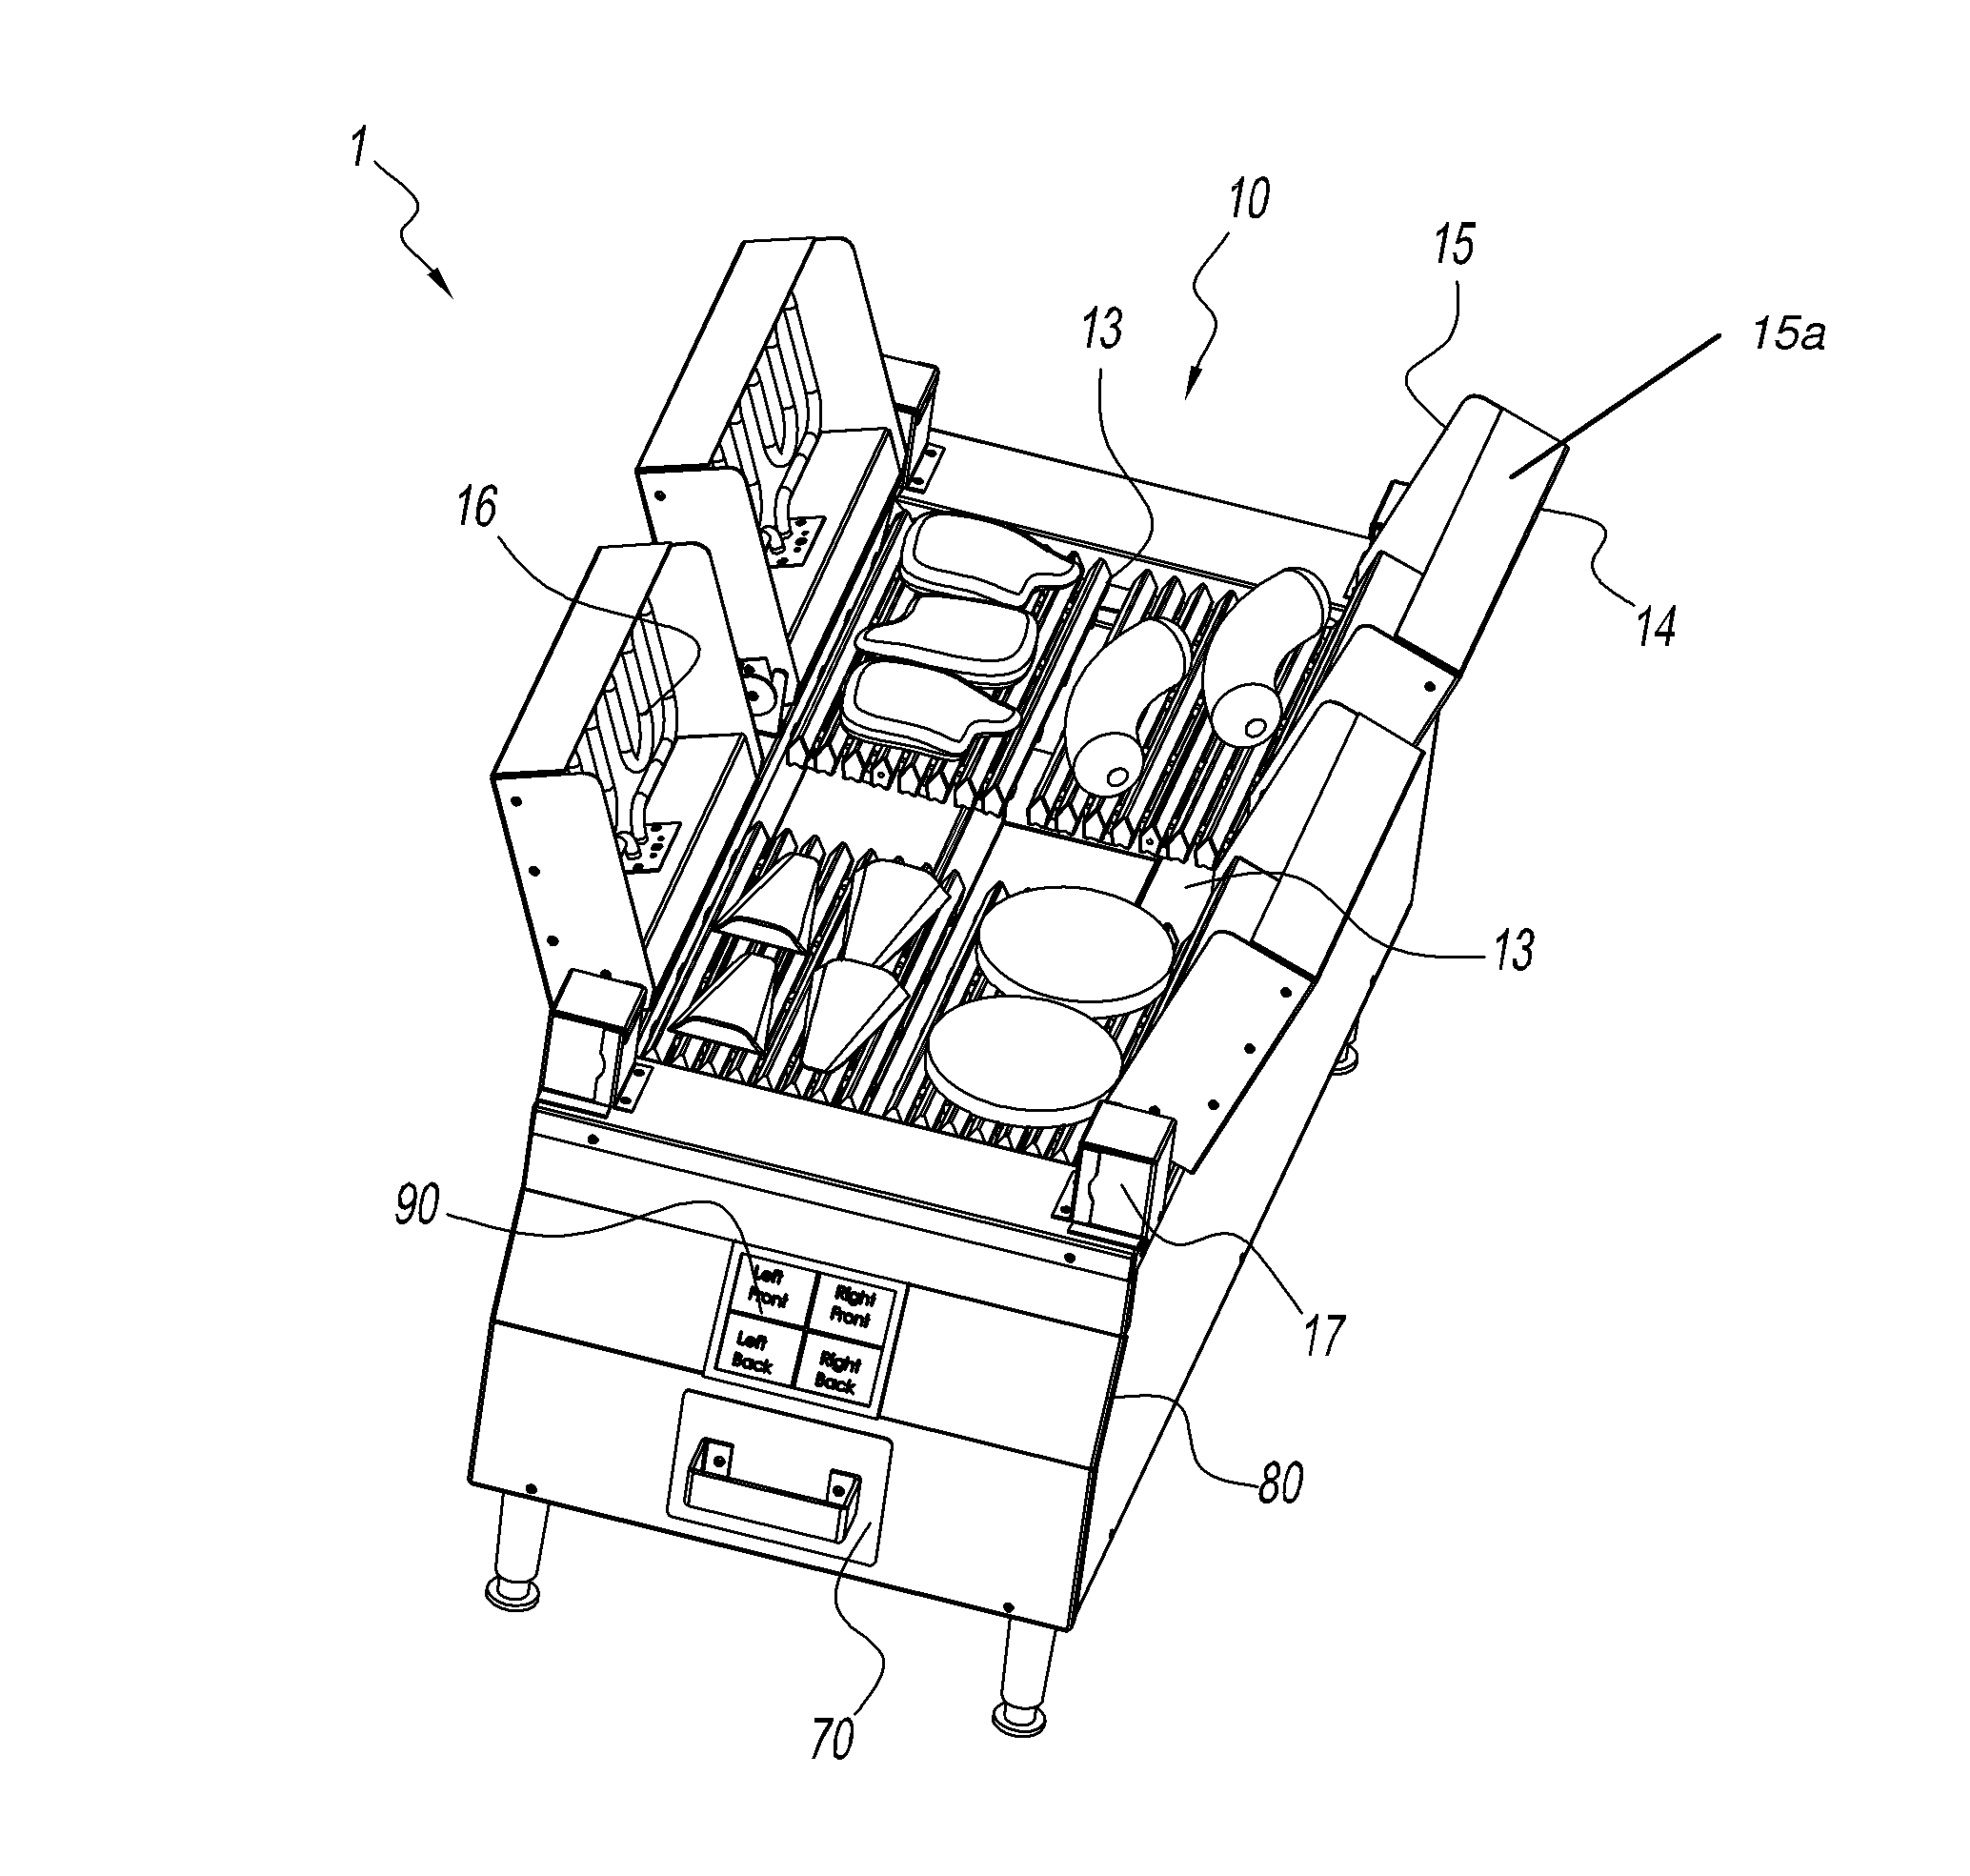 Multi-zoned clamshell charbroiler